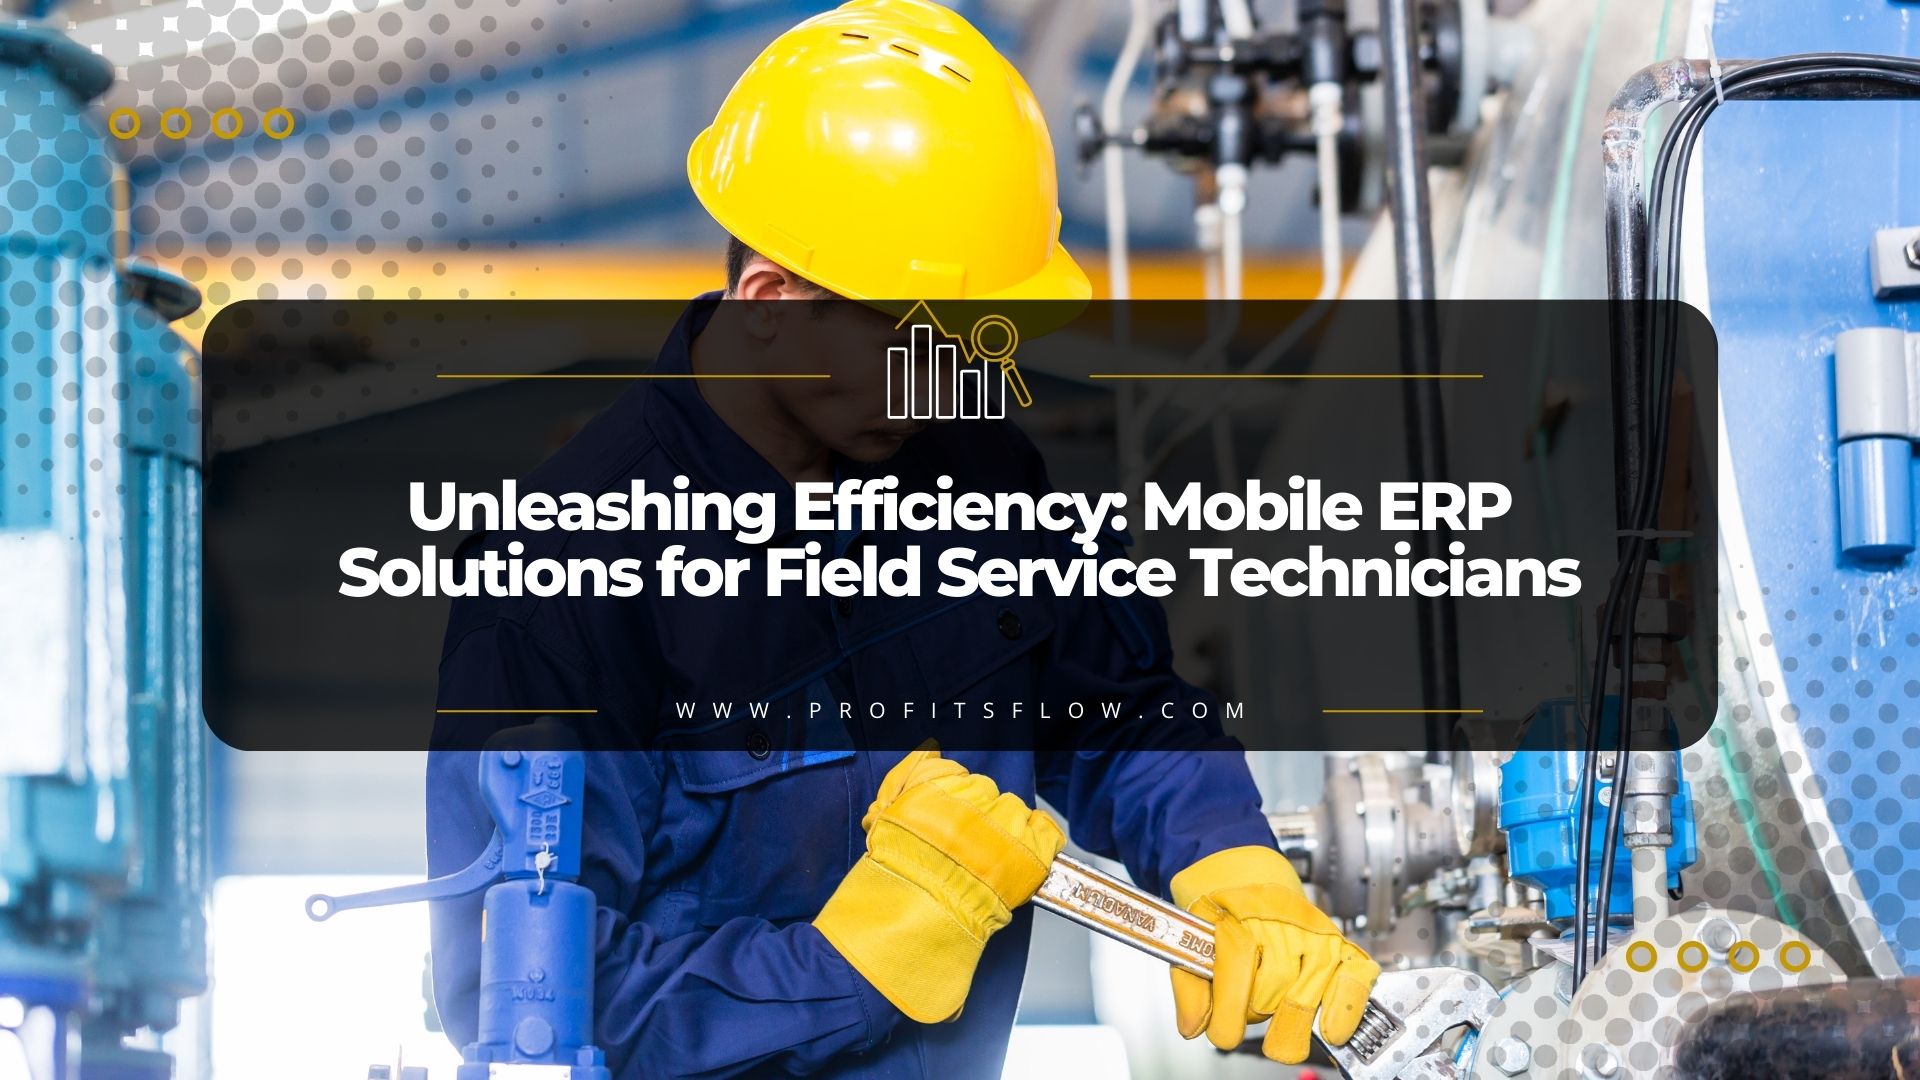 Unleashing Efficiency: Mobile ERP Solutions for Field Service Technicians